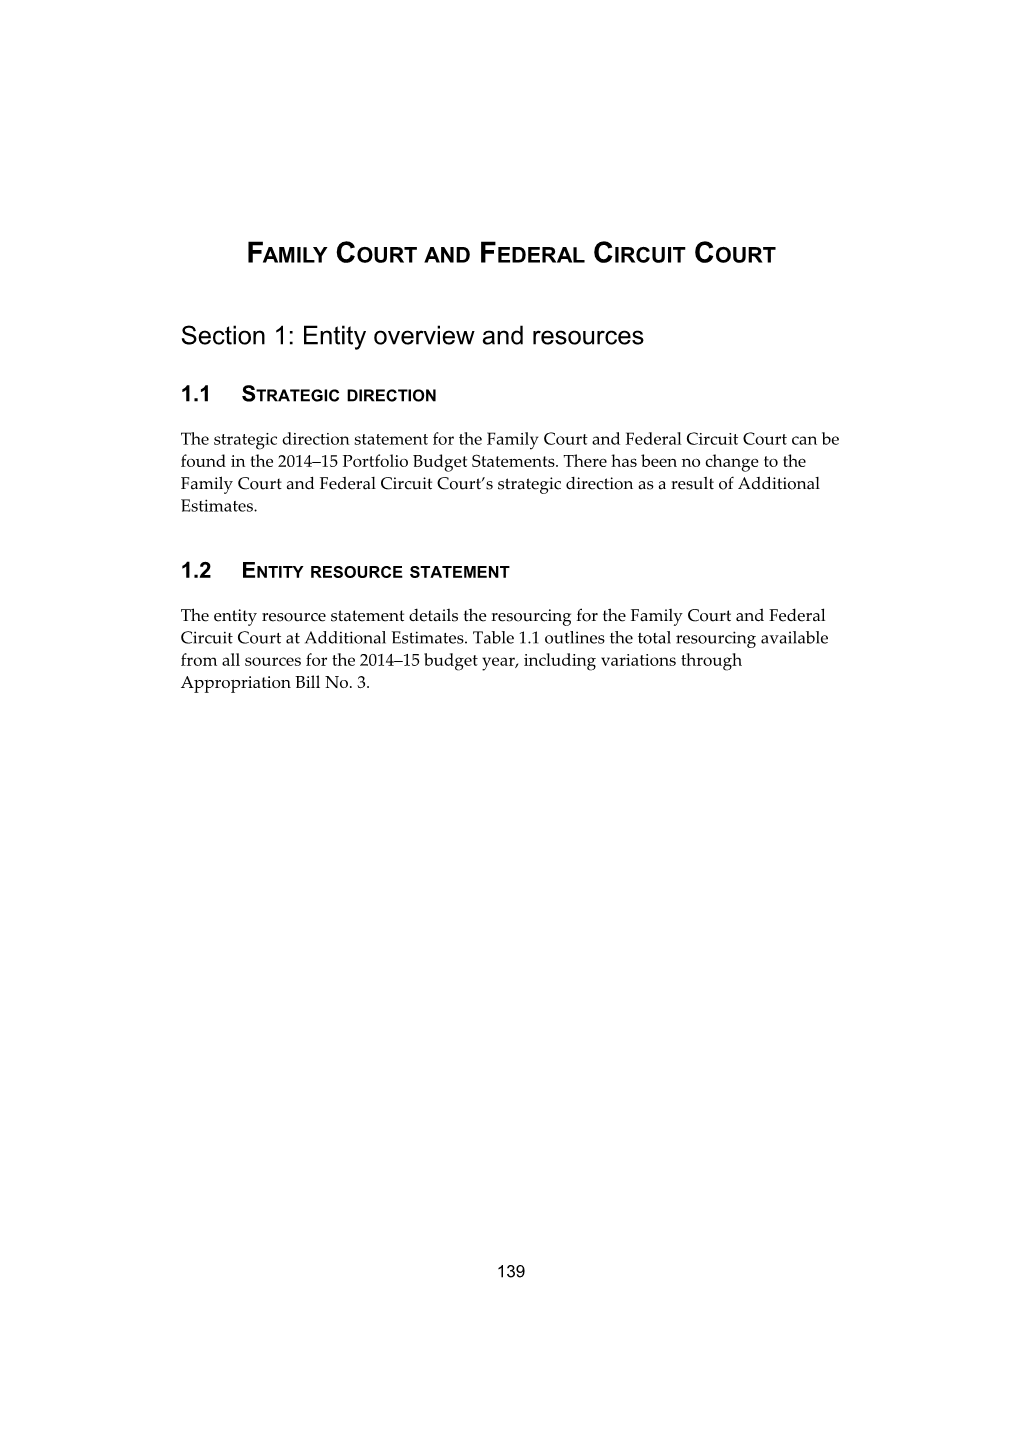 2014-15 Paes Family Court and Federal Circuit Court